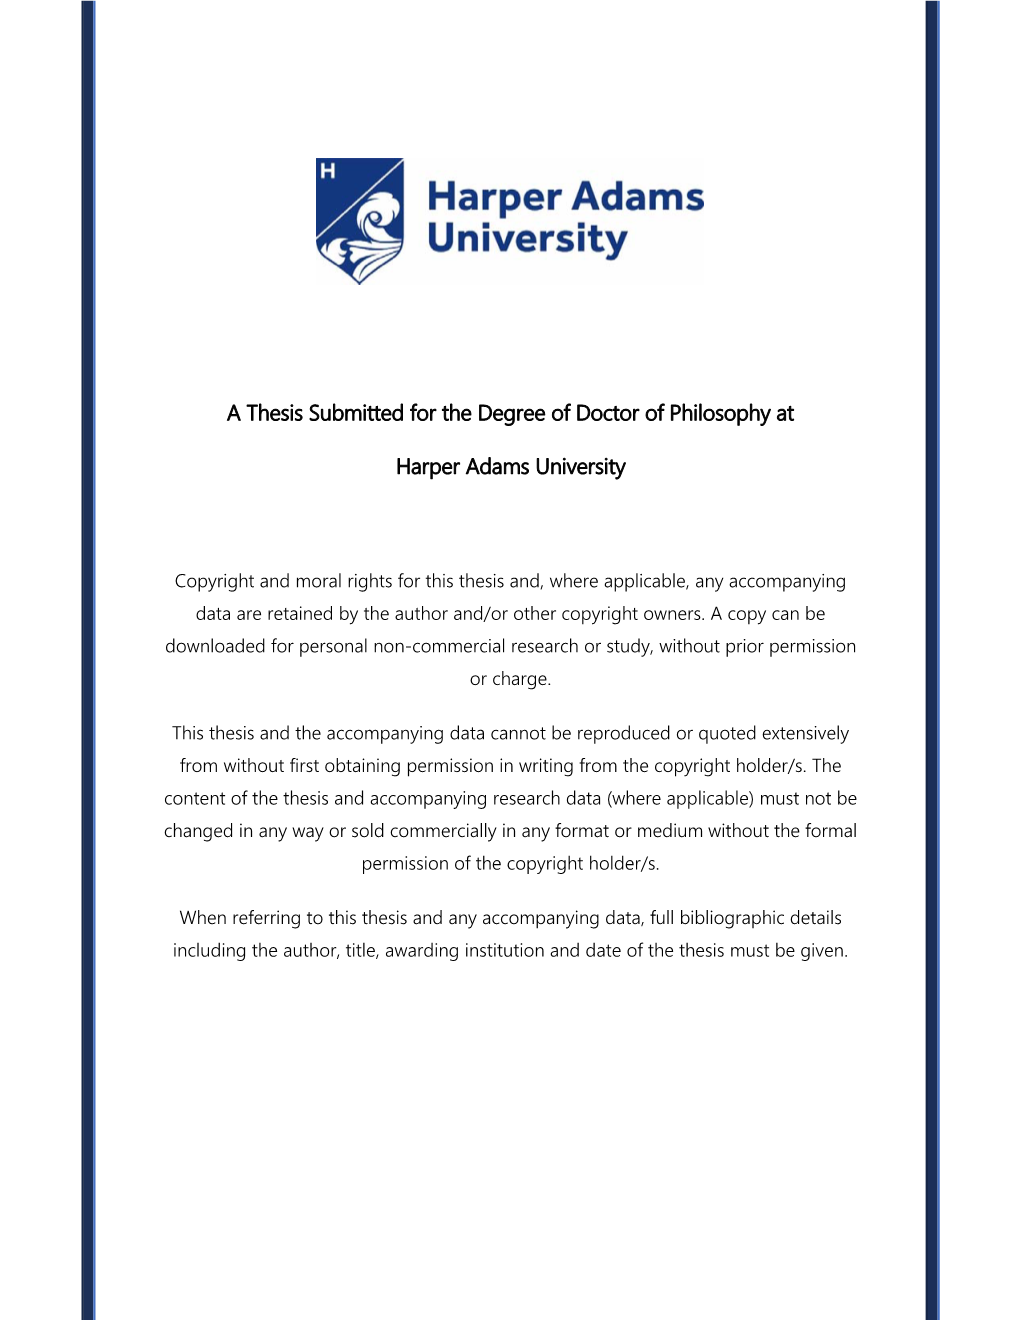 A Thesis Submitted for the Degree of Doctor of Philosophy at Harper Adams University